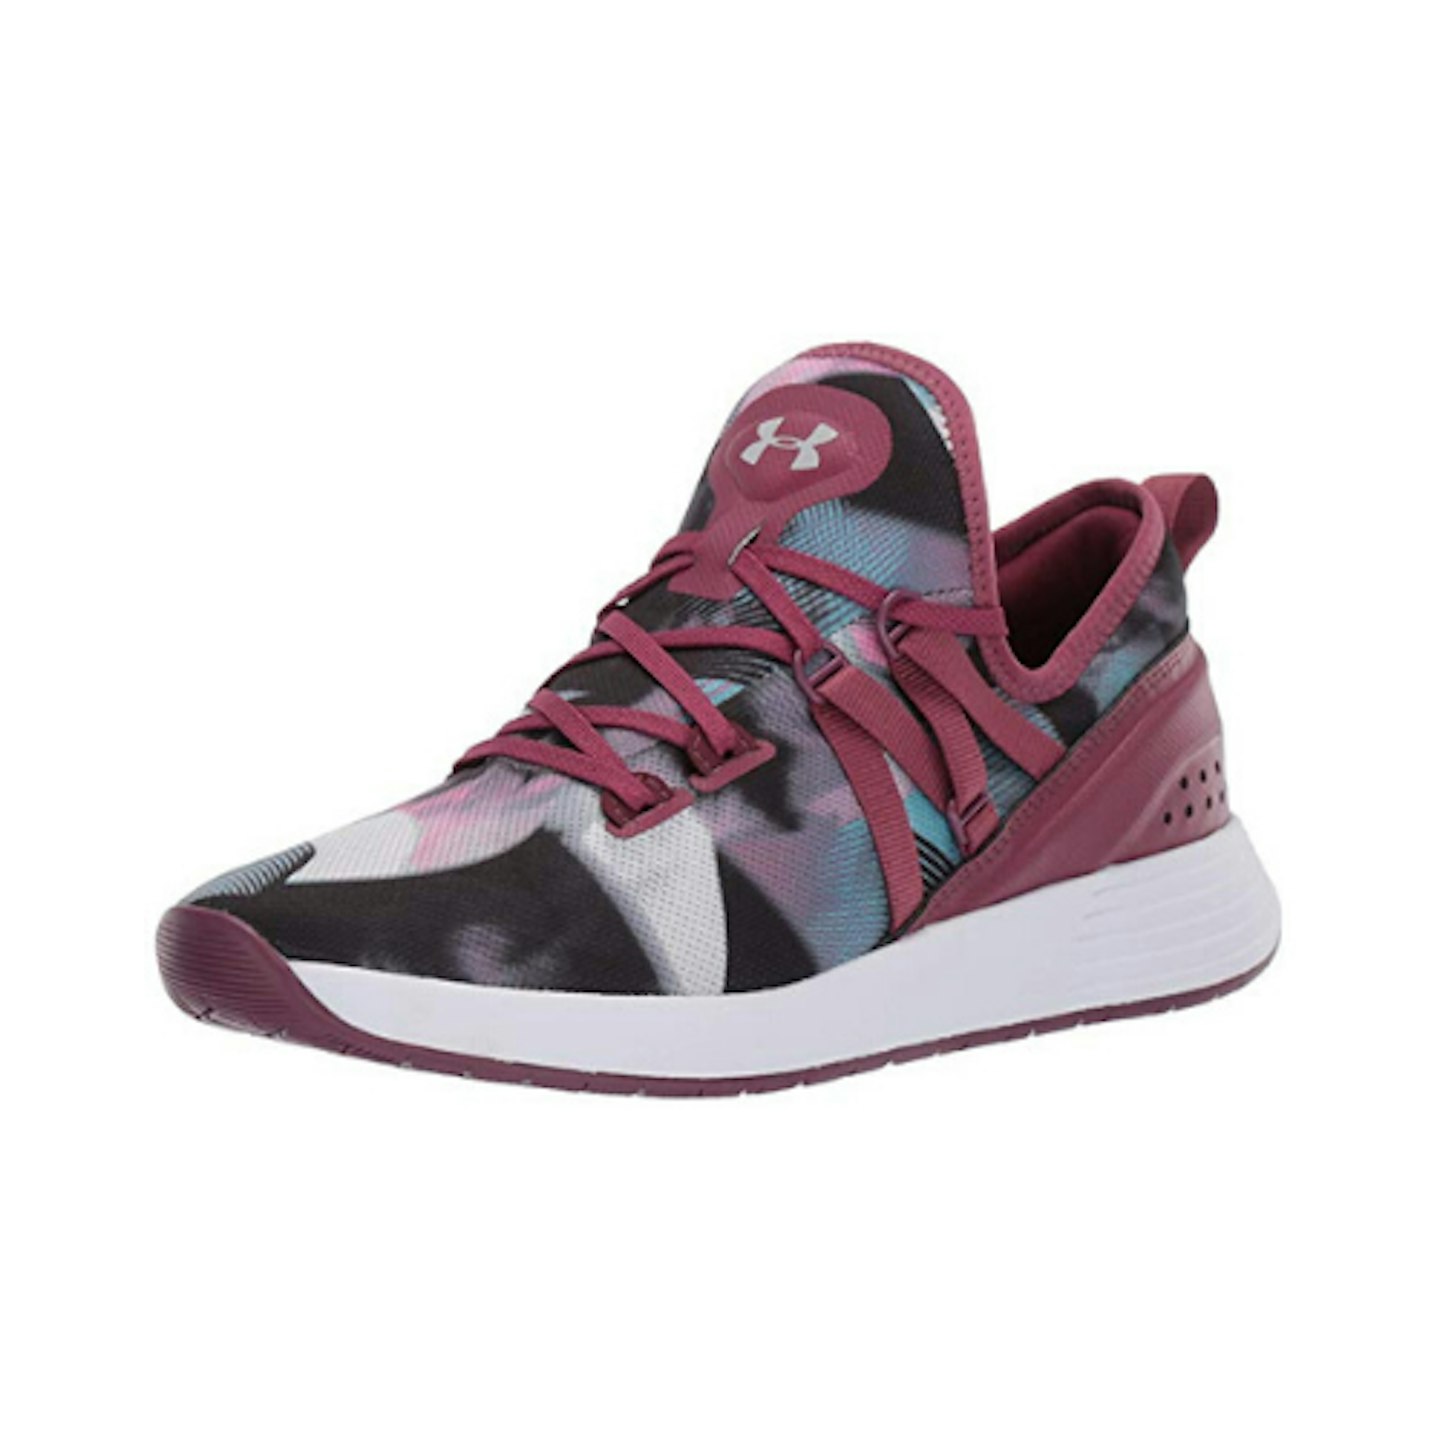 Under Armour Women's Breathe Trainers